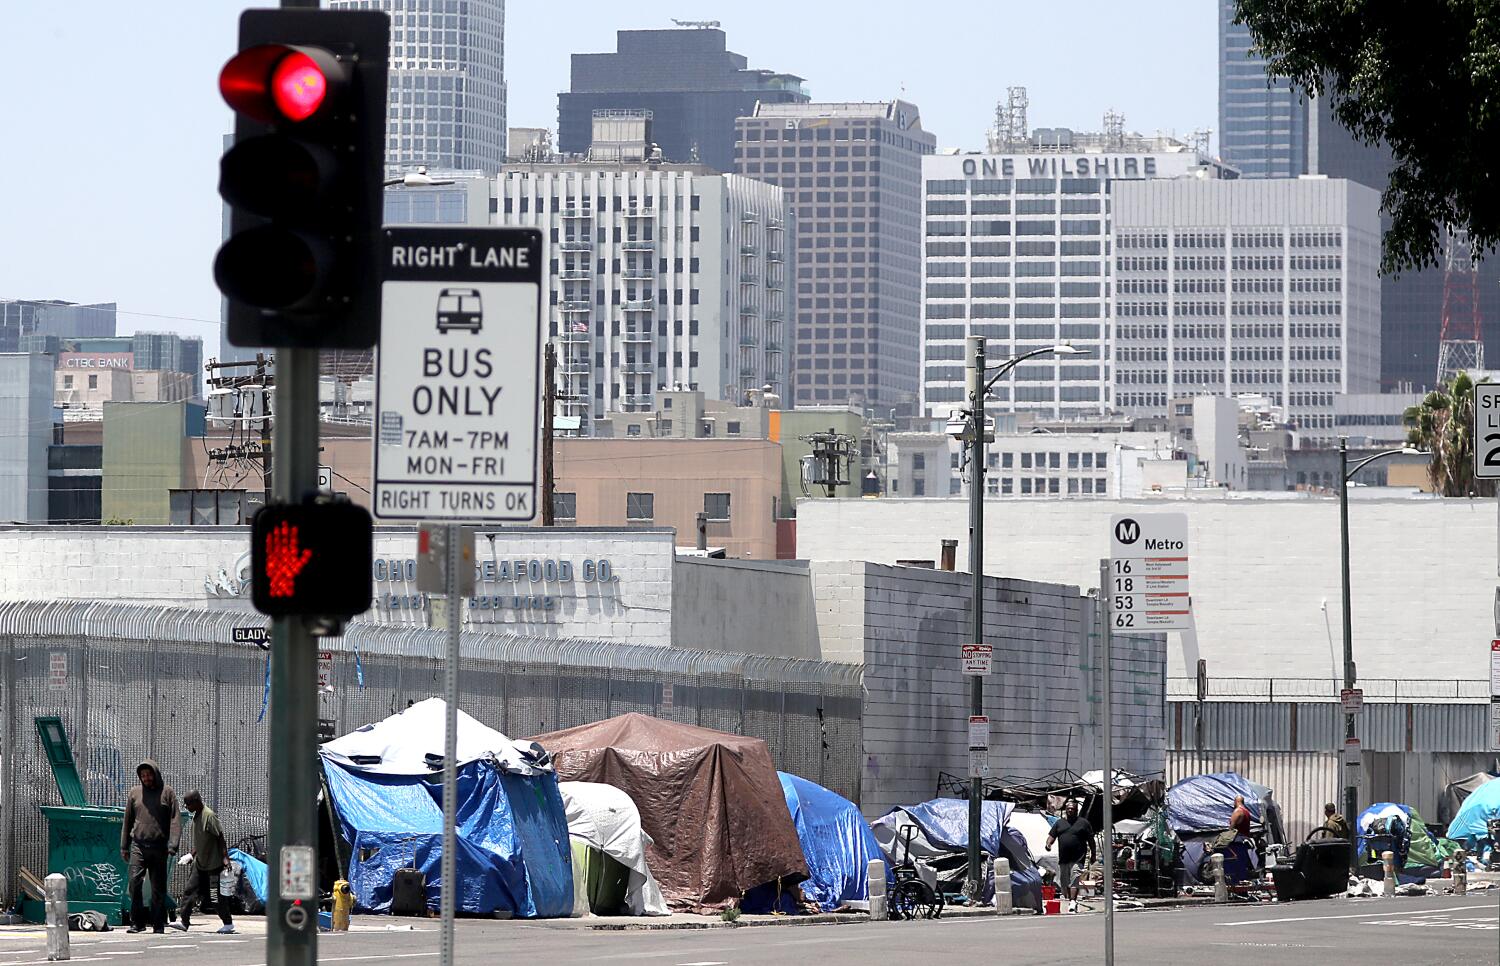 Supreme Court rules cities may enforce laws against homeless encampments